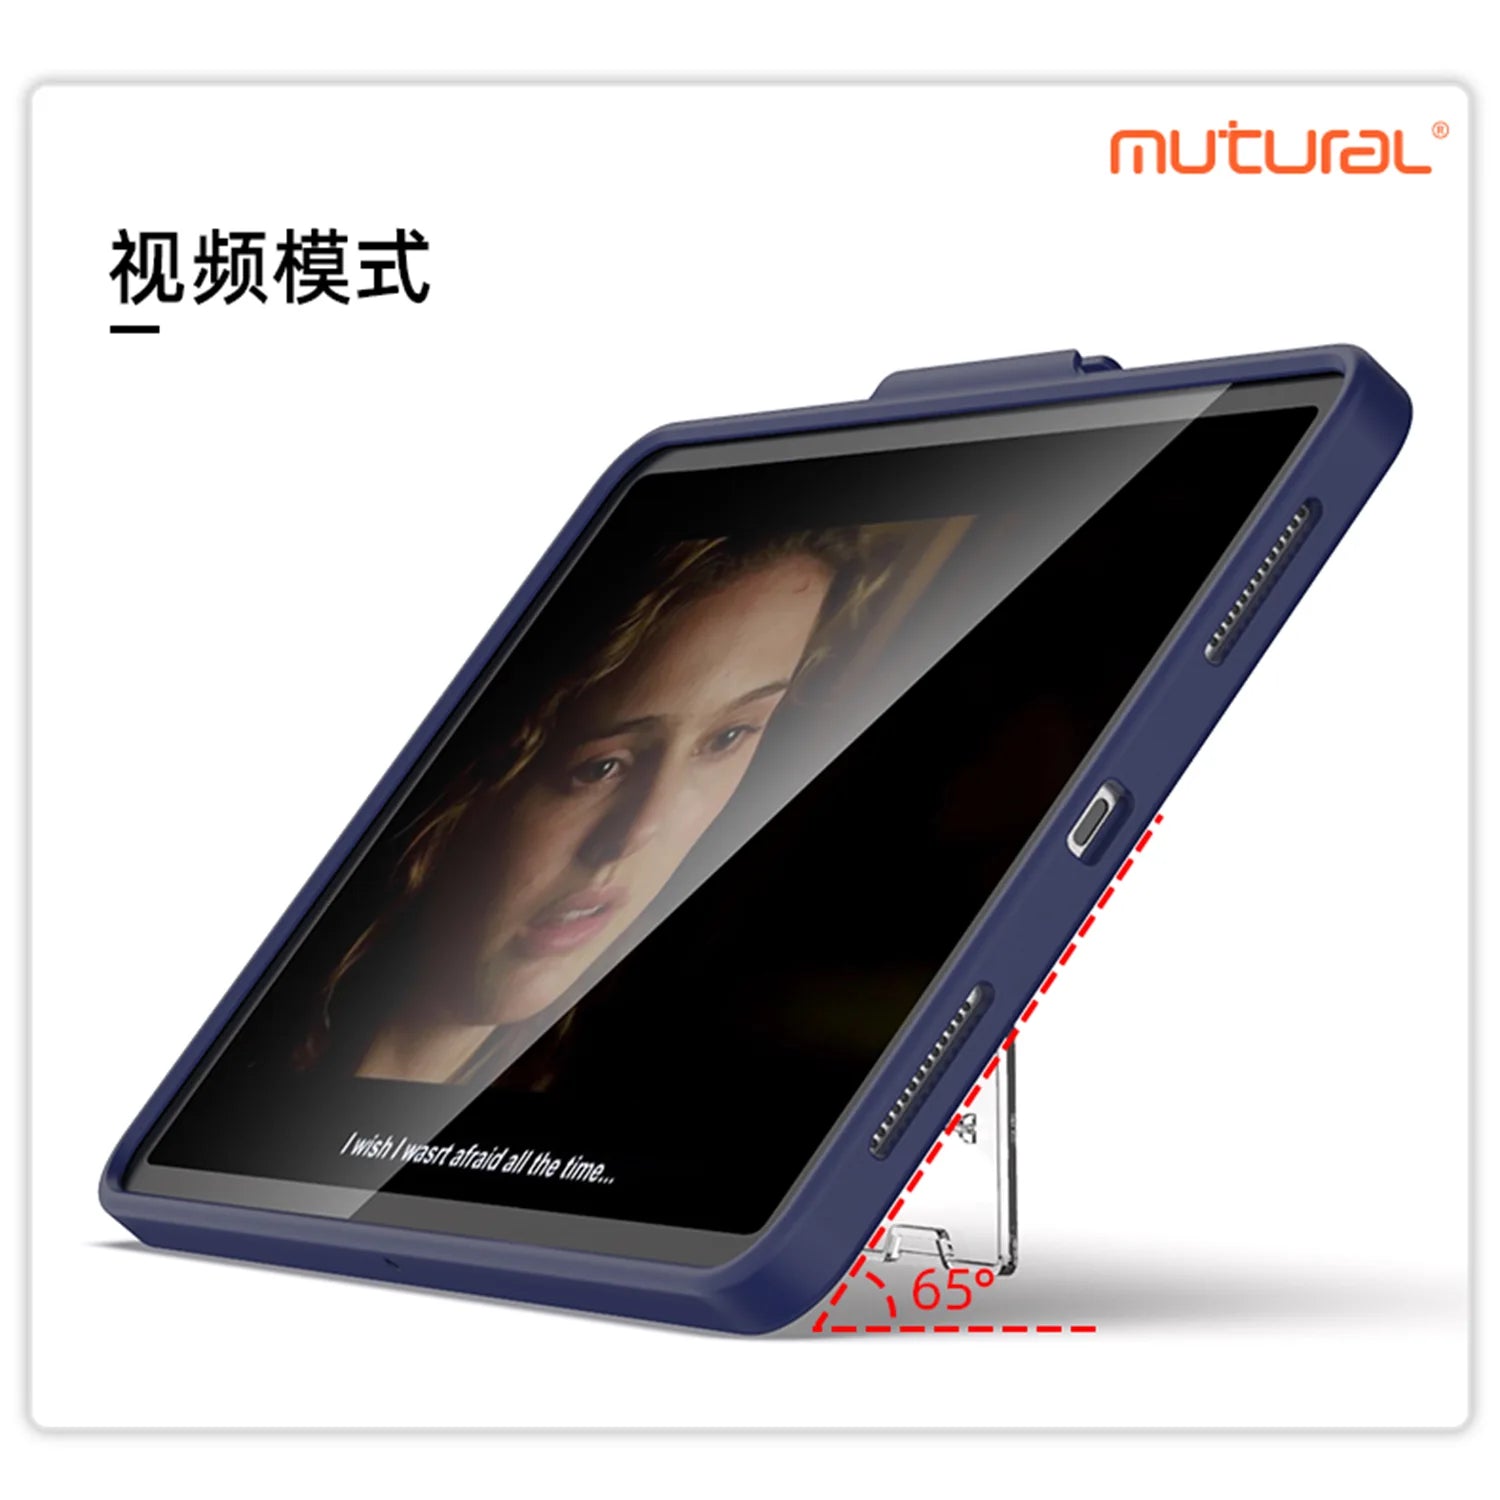 Mutural Qinfeng Series Back Cover with Kickstand and Pencil Holder for iPad 10.2"/ 10.5"/ Air 10.9"/ Pro 11" / 10th Gen 10.9"